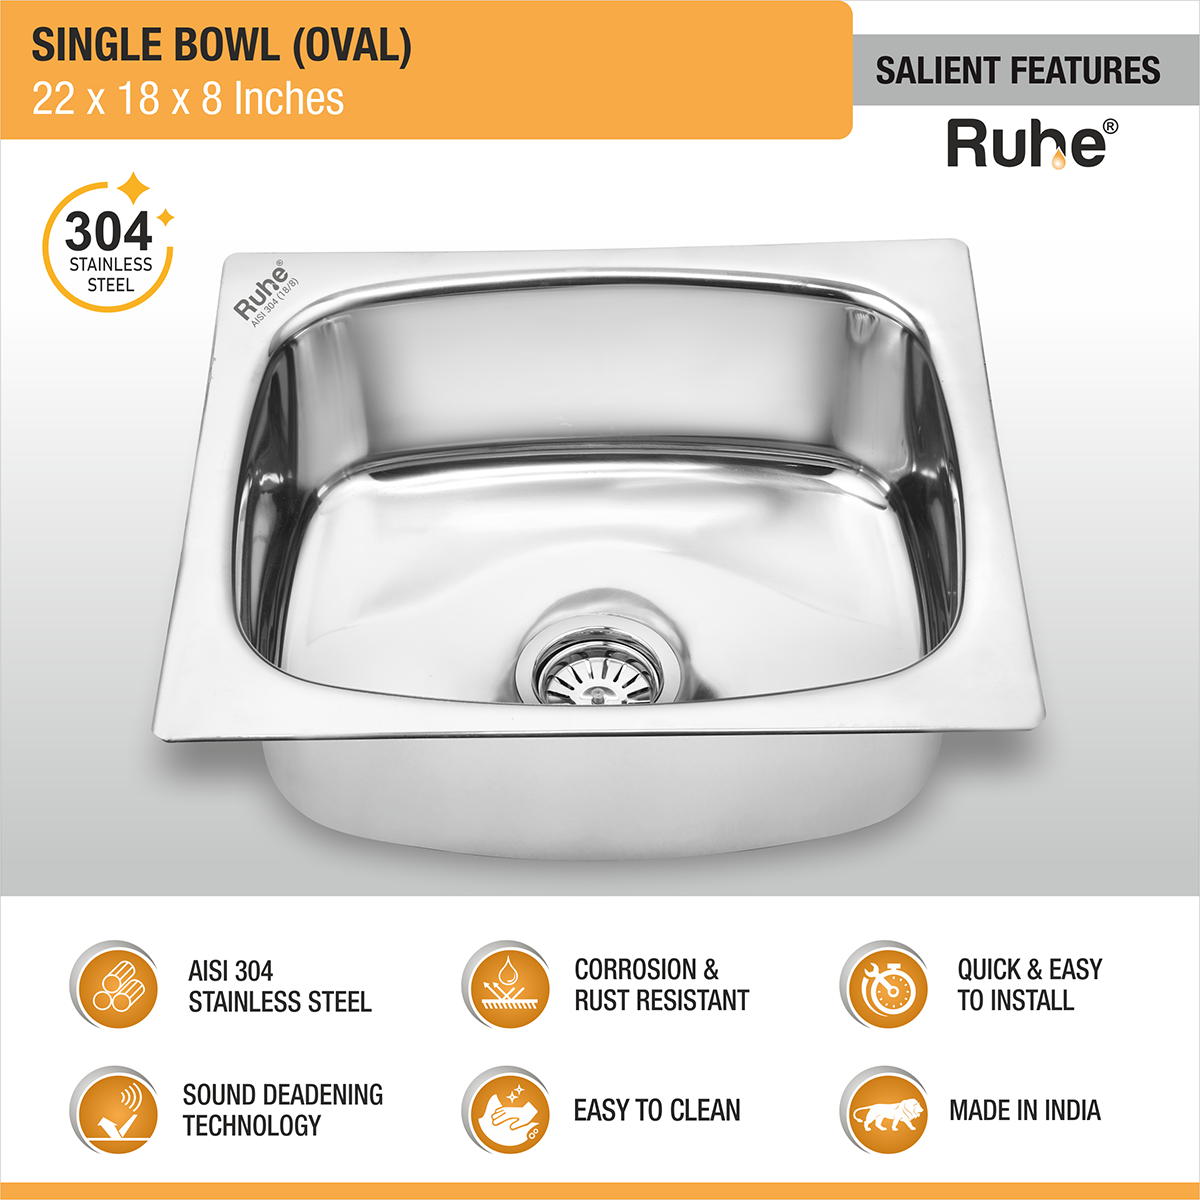 Oval Single Bowl (22 x 18 x 8 inches) 304-Grade Kitchen Sink features and benefits